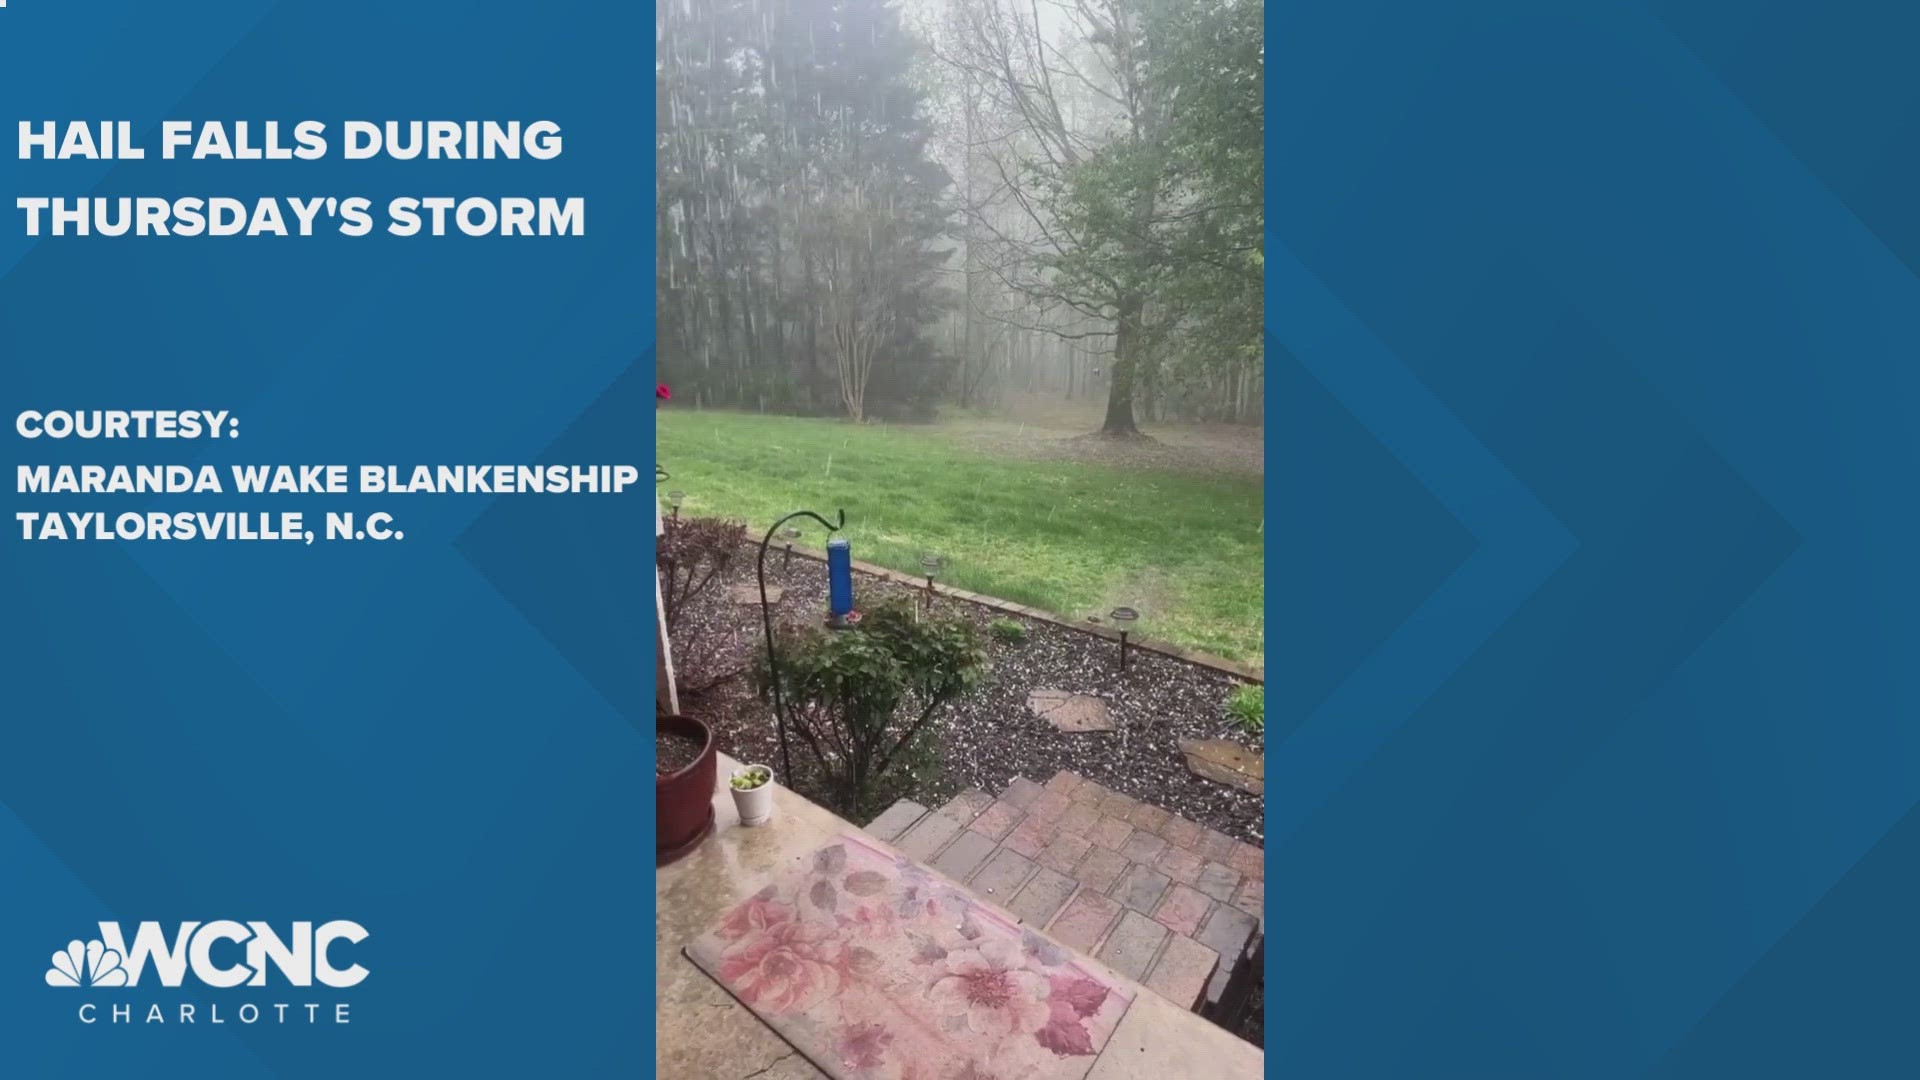 WCNC Charlotte viewers had their phones recording as the storm rolled through.